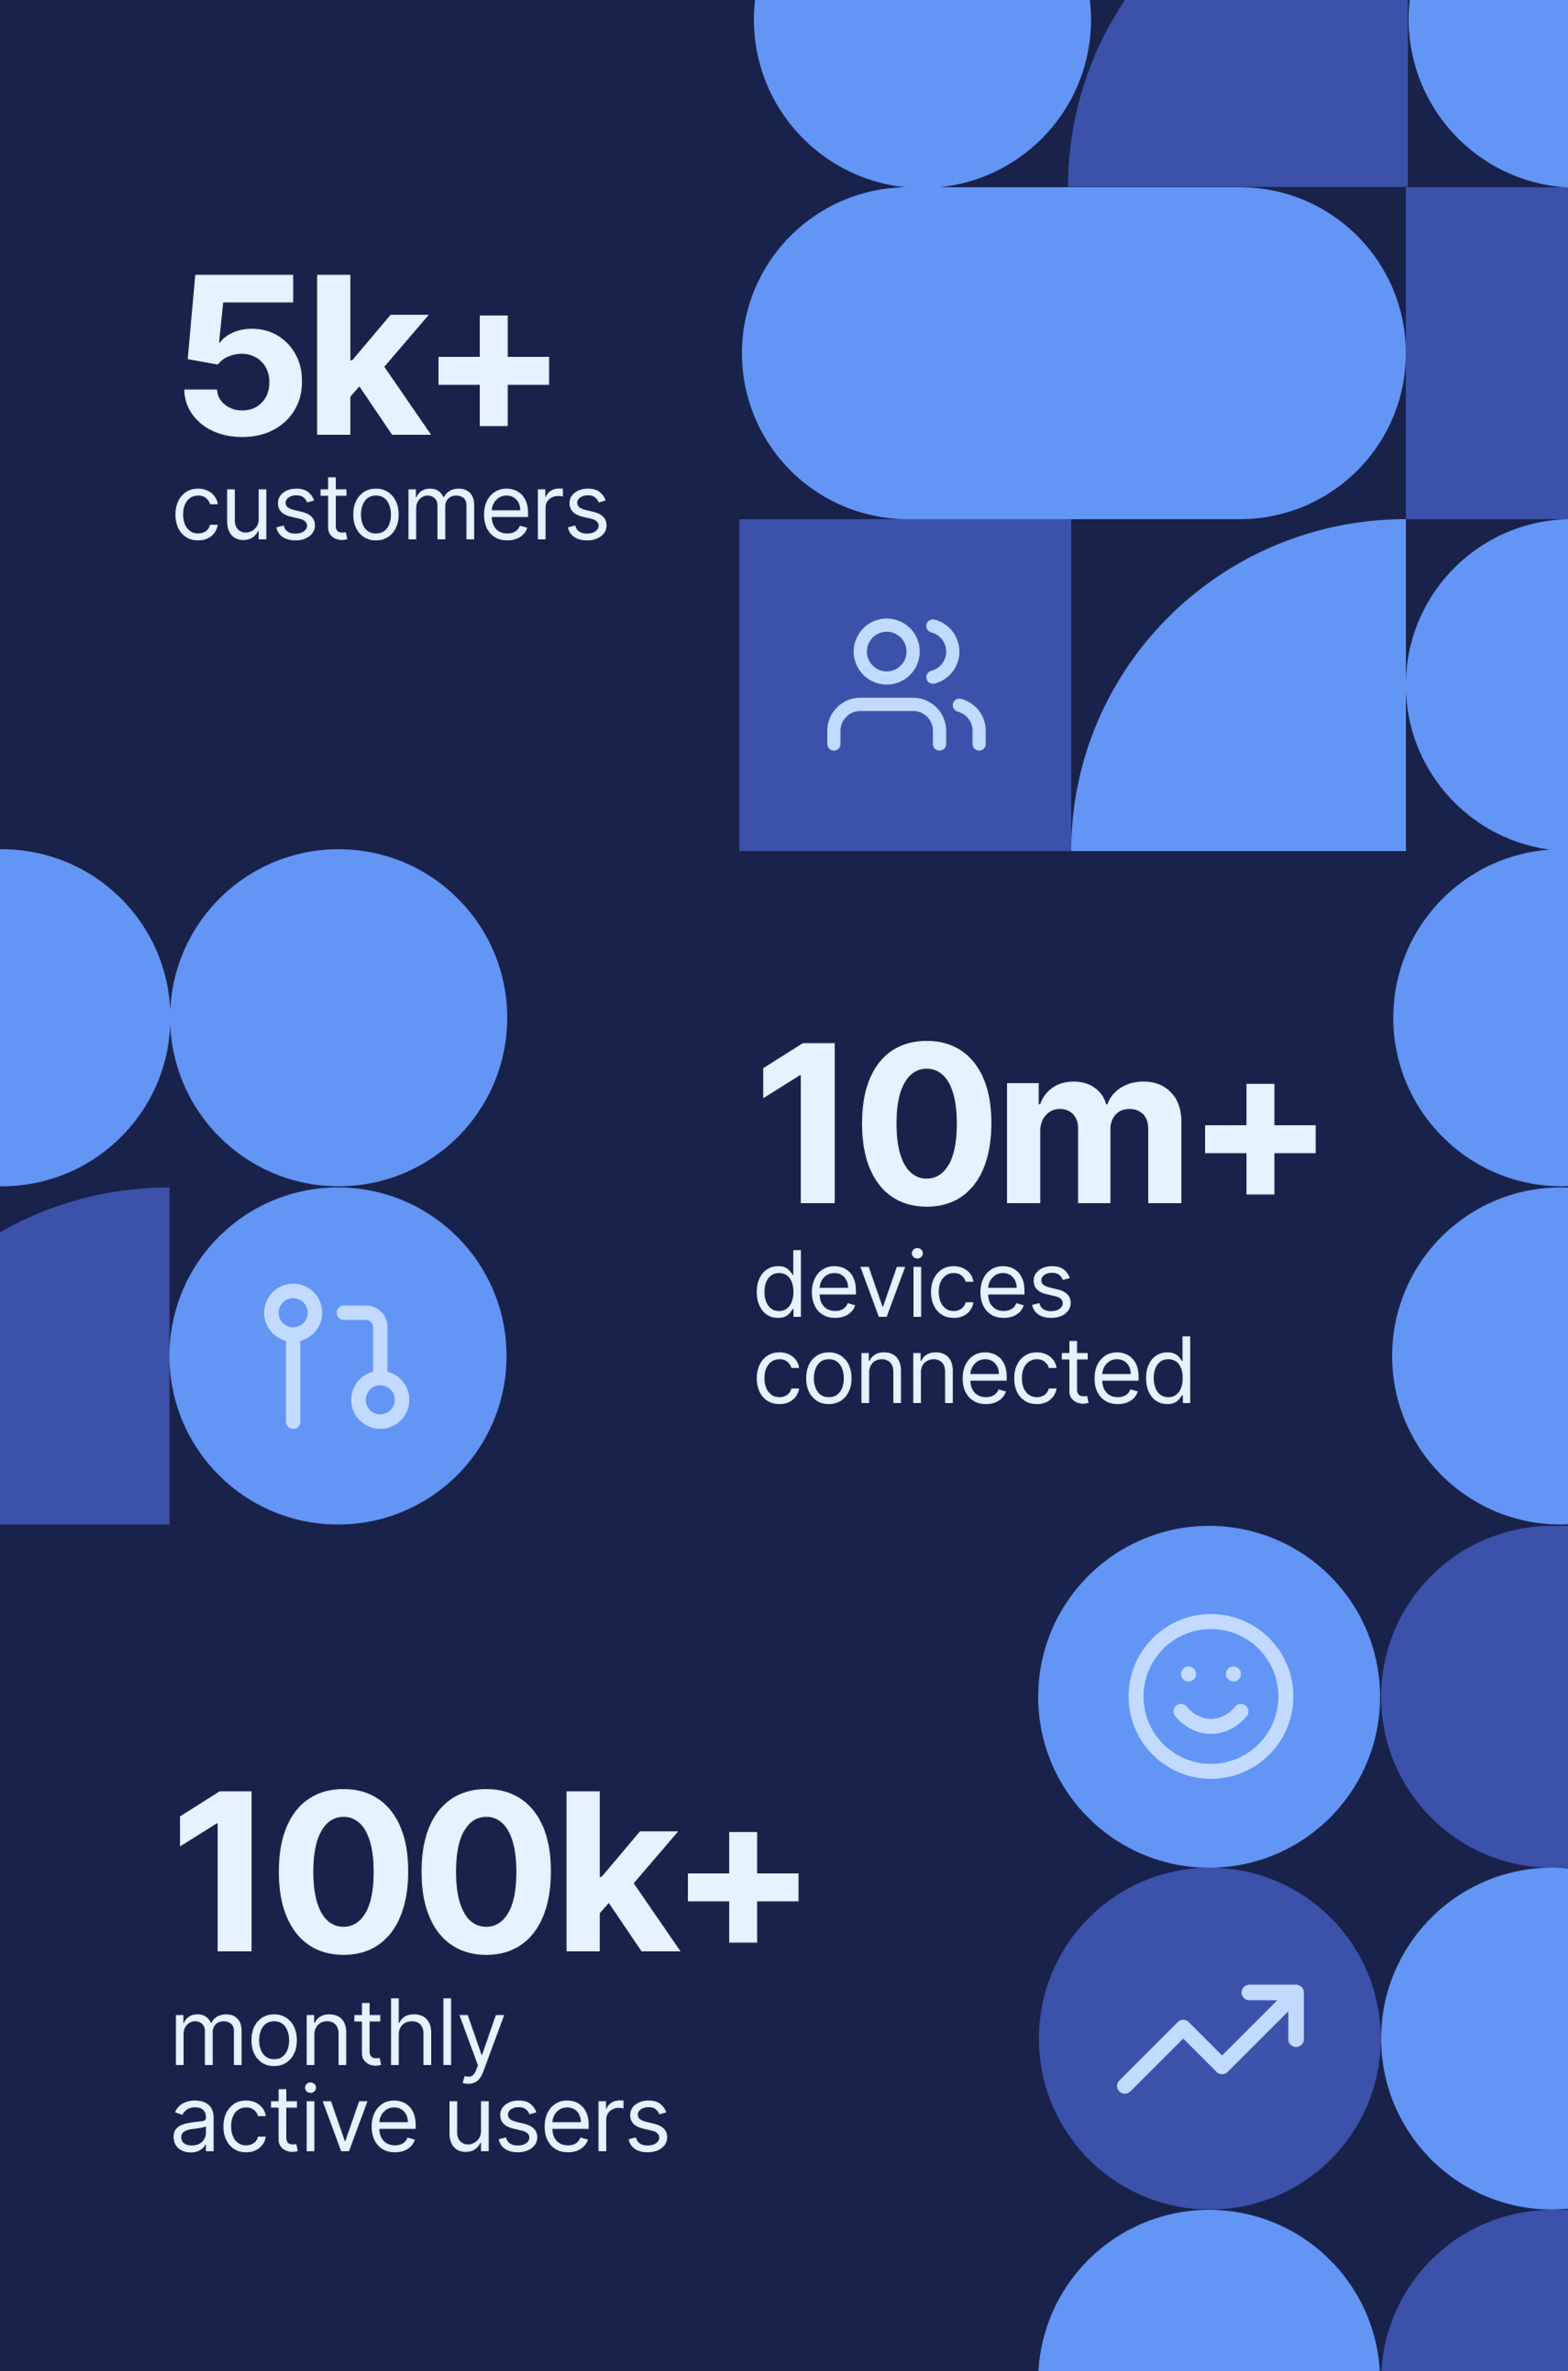 5k+ customers, 10m+ devices connected, 100k+ monthly active users